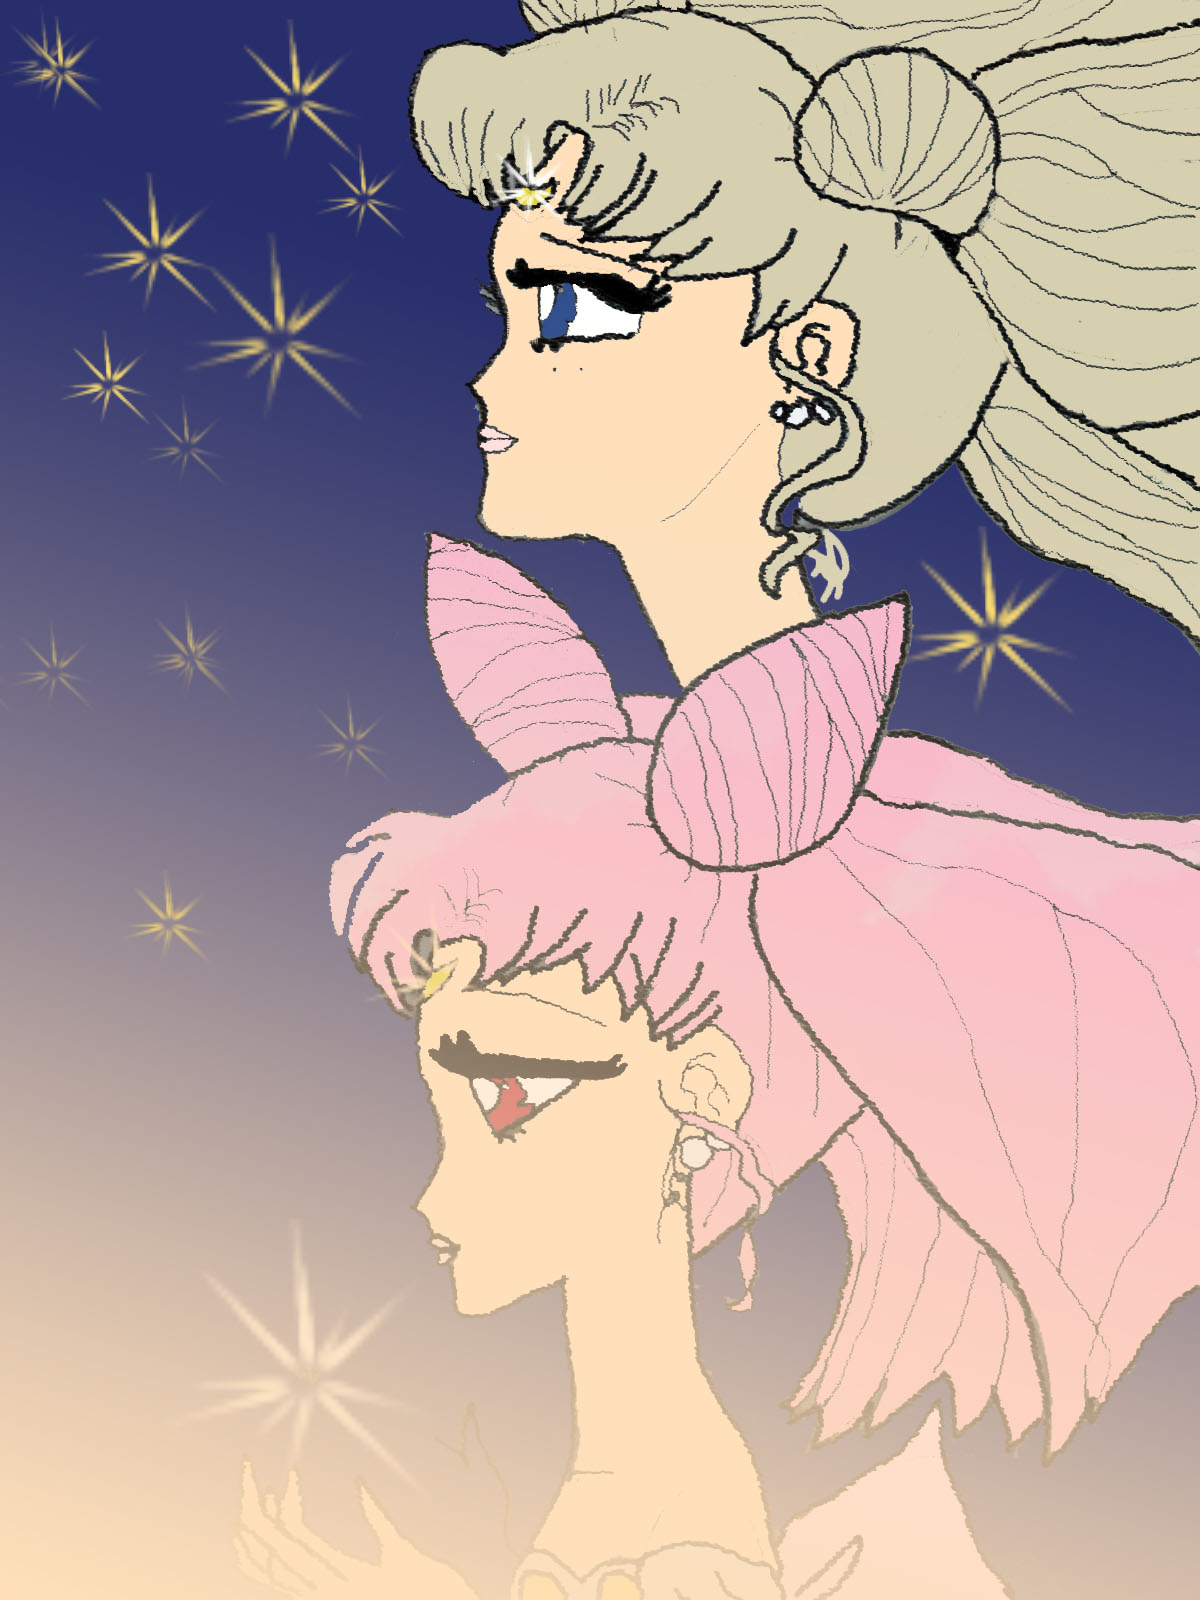 a Colored version of queen serenity and small lady by ilikktomoo1